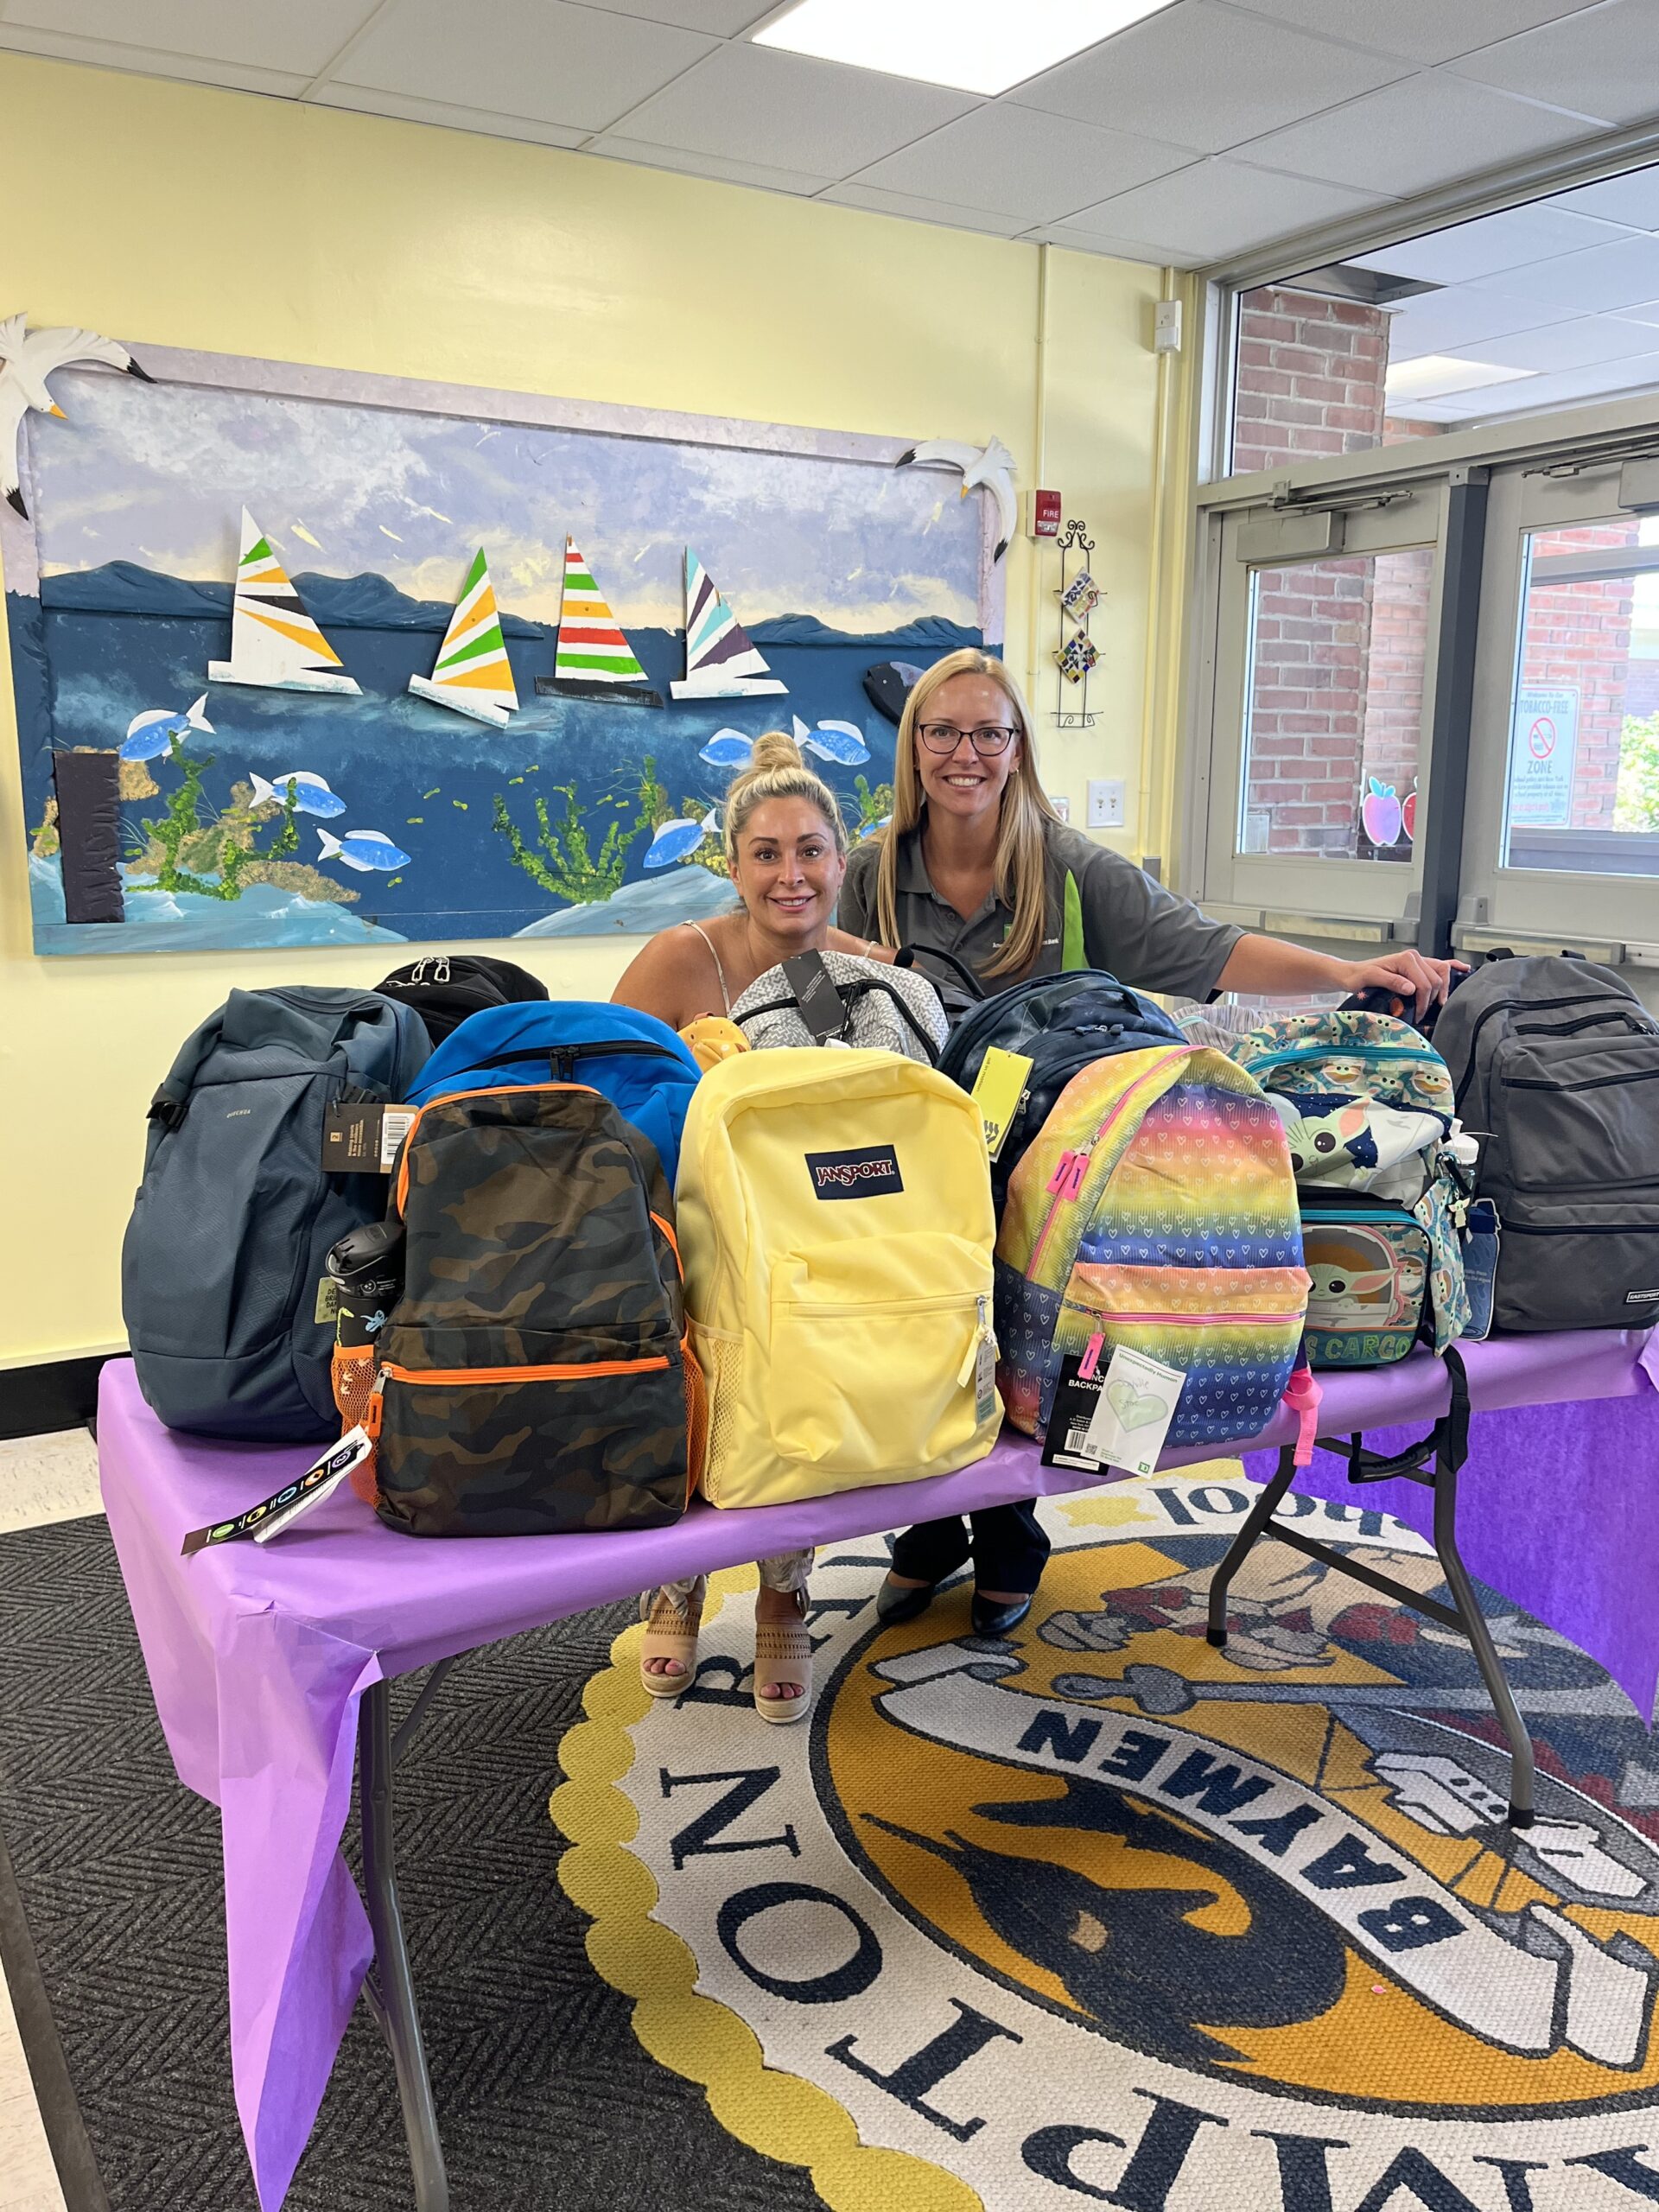 Hampton Bays Elementary School recently accepted a donation of 20 backpacks, which will be donated to students in need. Second grade teacher Lori Foster accepted the donation from Maryellen Feretti, TD retail market manager. COURTESY HAMPTON BAYS SCHOOL DISTRICT